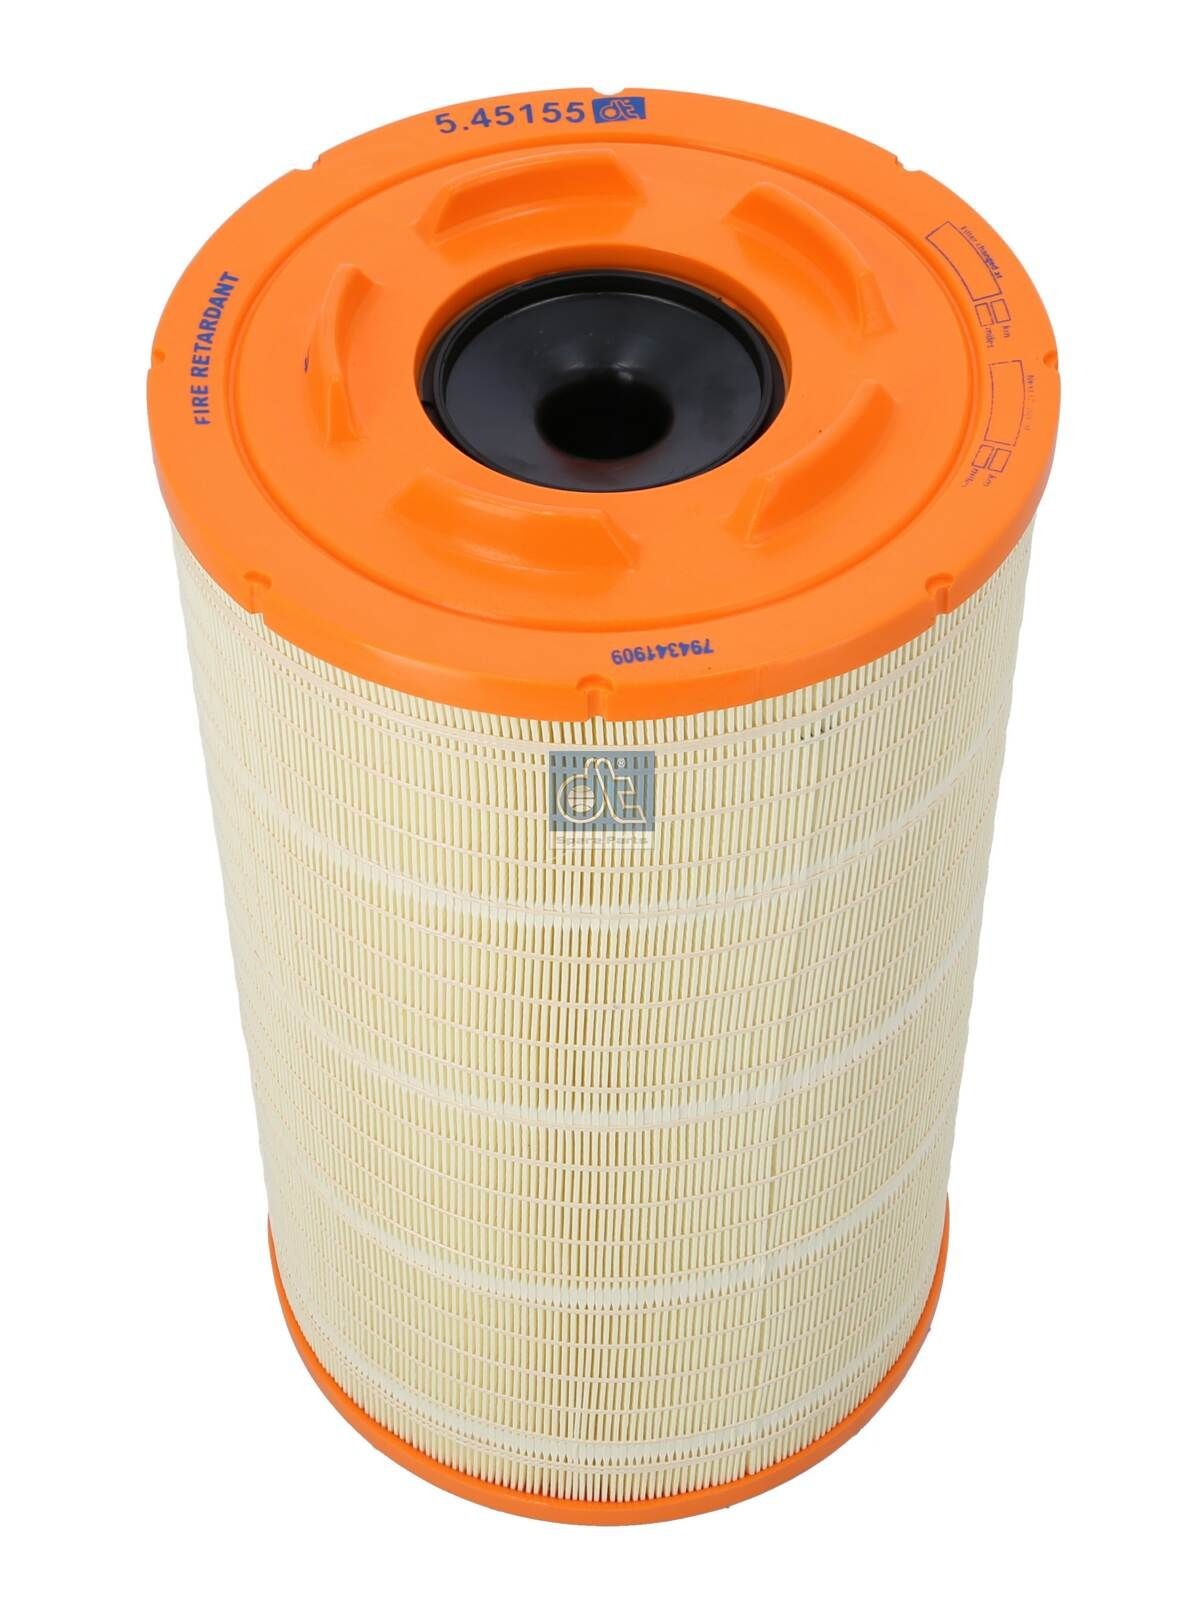 DT Spare Parts Air filter 5.45155